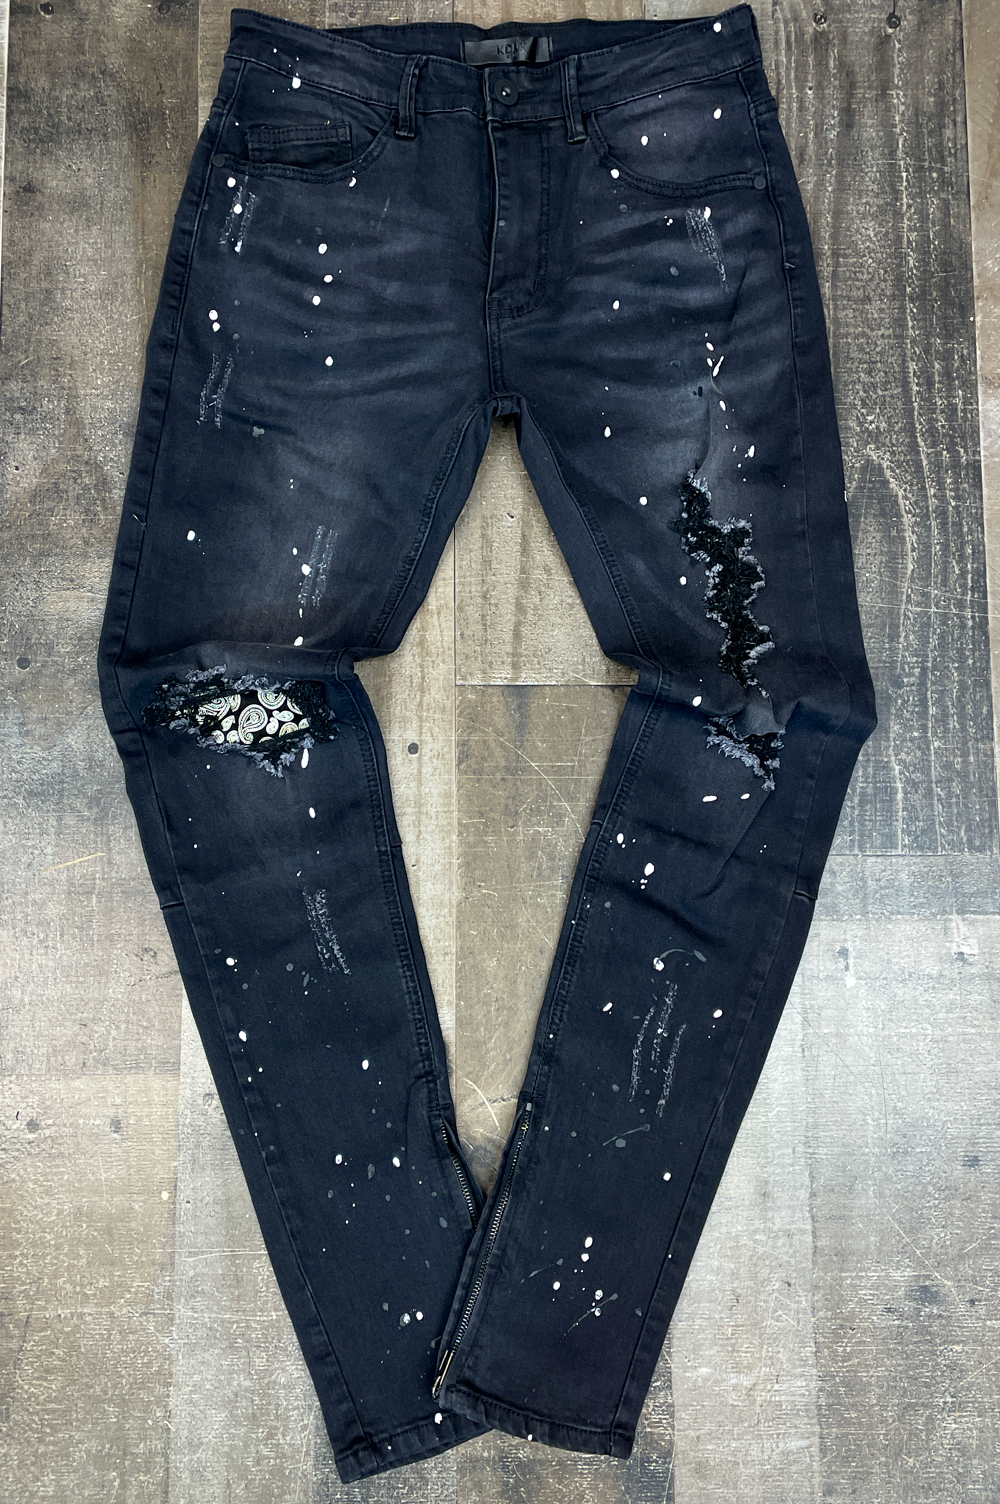 KDNK- under patched paisley jeans